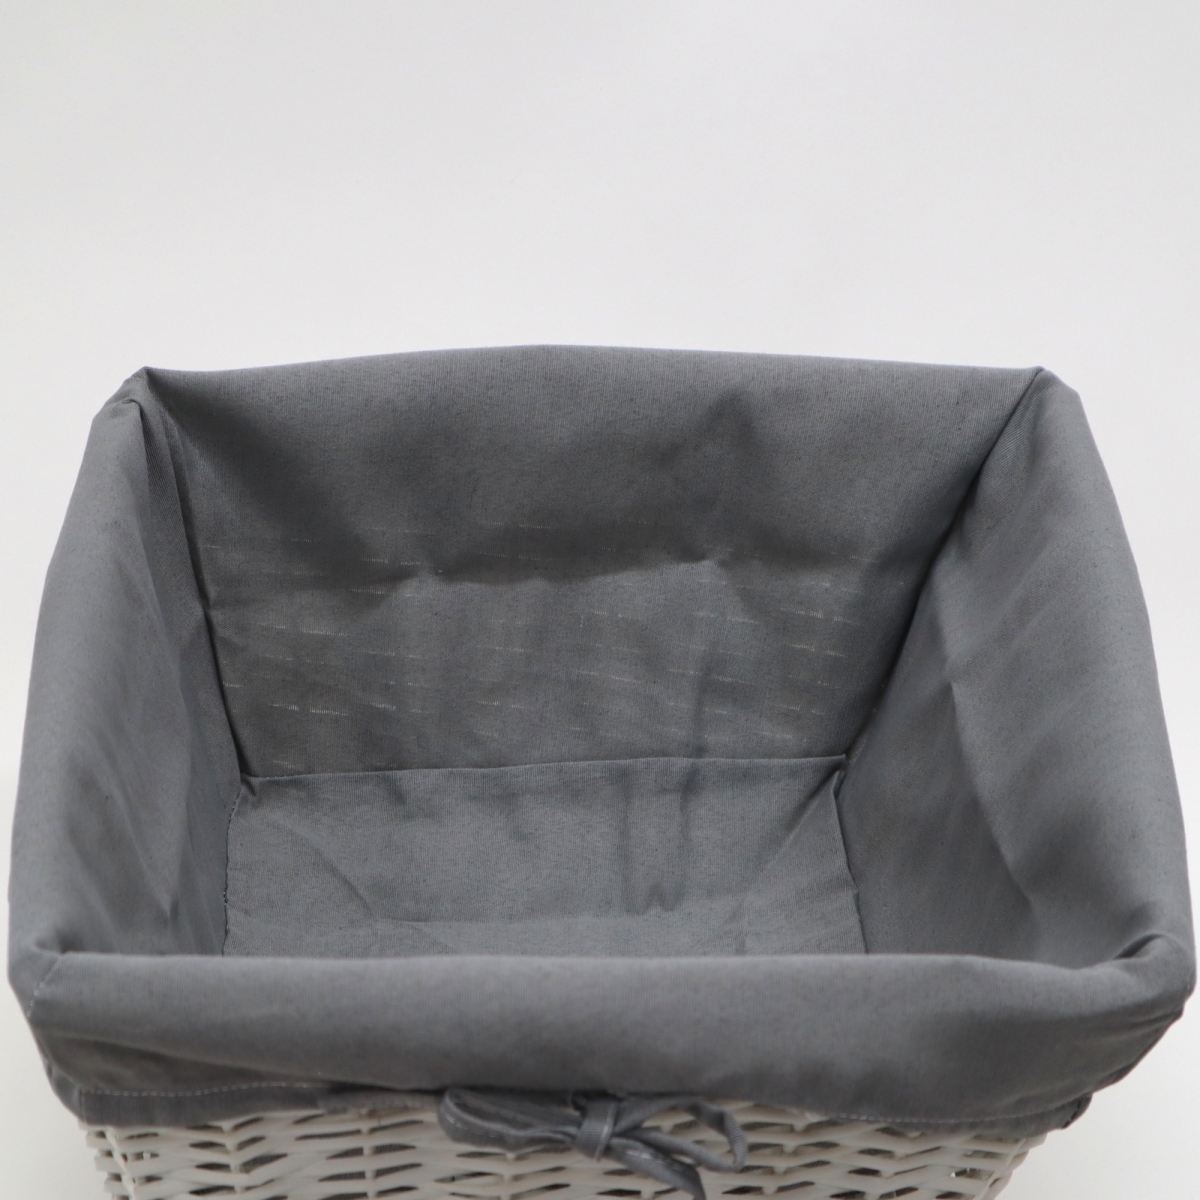 3136gy Large Basket Liner - Solid Gray